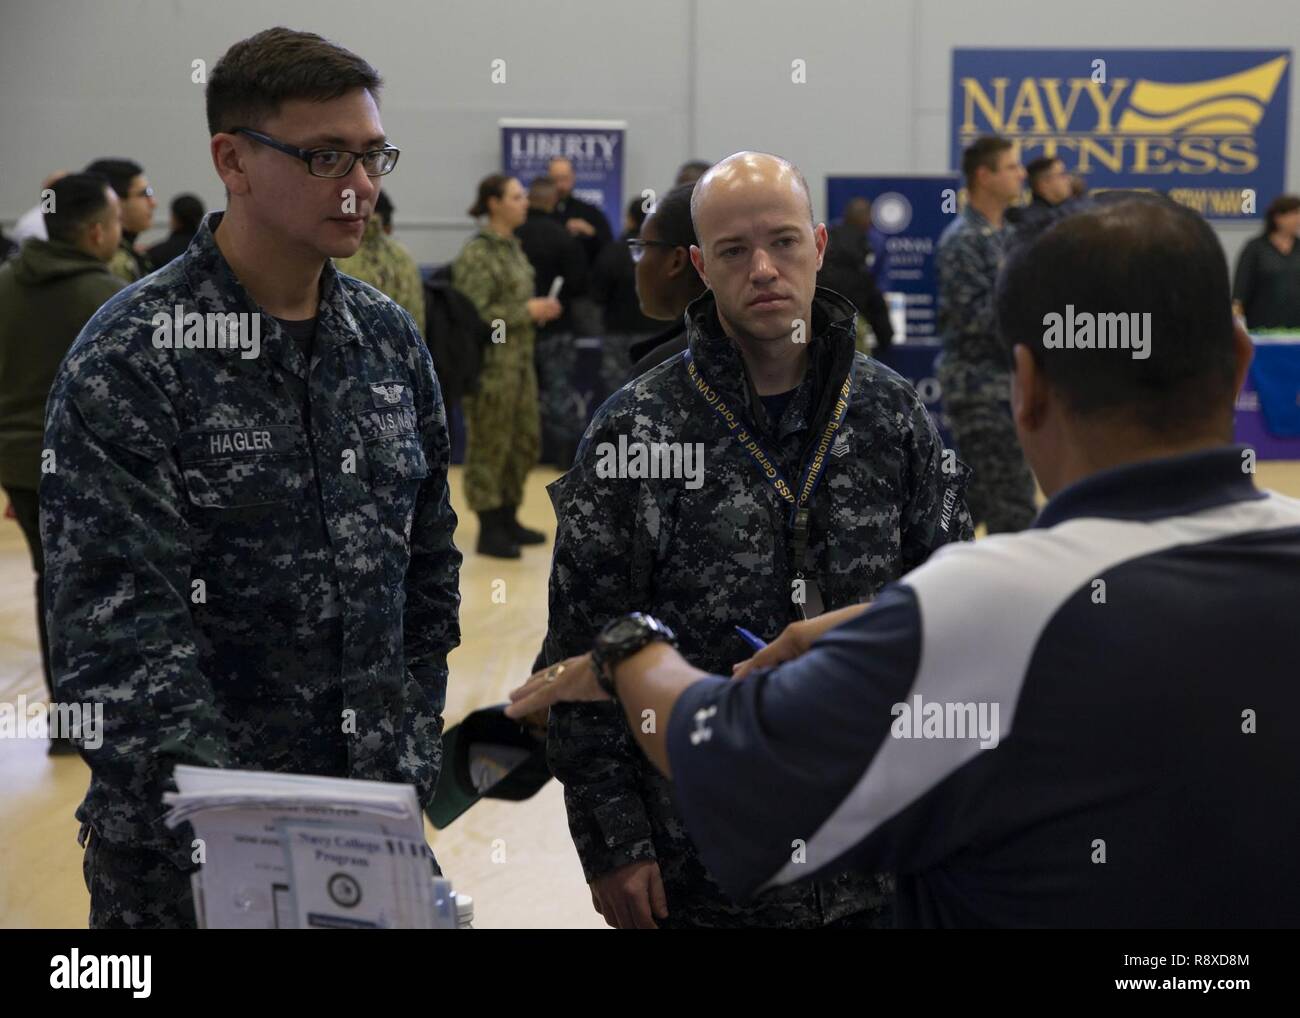 NEWPORT NEWS, Va. (Dec. 6, 2018) Aviation Electrician's Mate 1st Class Christopher Hagler, from San Luis Obispo, California, left, and Aviation Electronics Technician 2nd Class Brandon Walker, from Woodbridge, Virginia, assigned to USS Gerald R. Ford's (CVN 78) aircraft intermediate maintenance department, meet with a college representative during the 2018 Newport News College Fair. Ford and USS George Washington (CVN 73) organized the event in which more than dozen colleges met with Sailors to discuss higher education opportunities. U.S. Navy Stock Photo